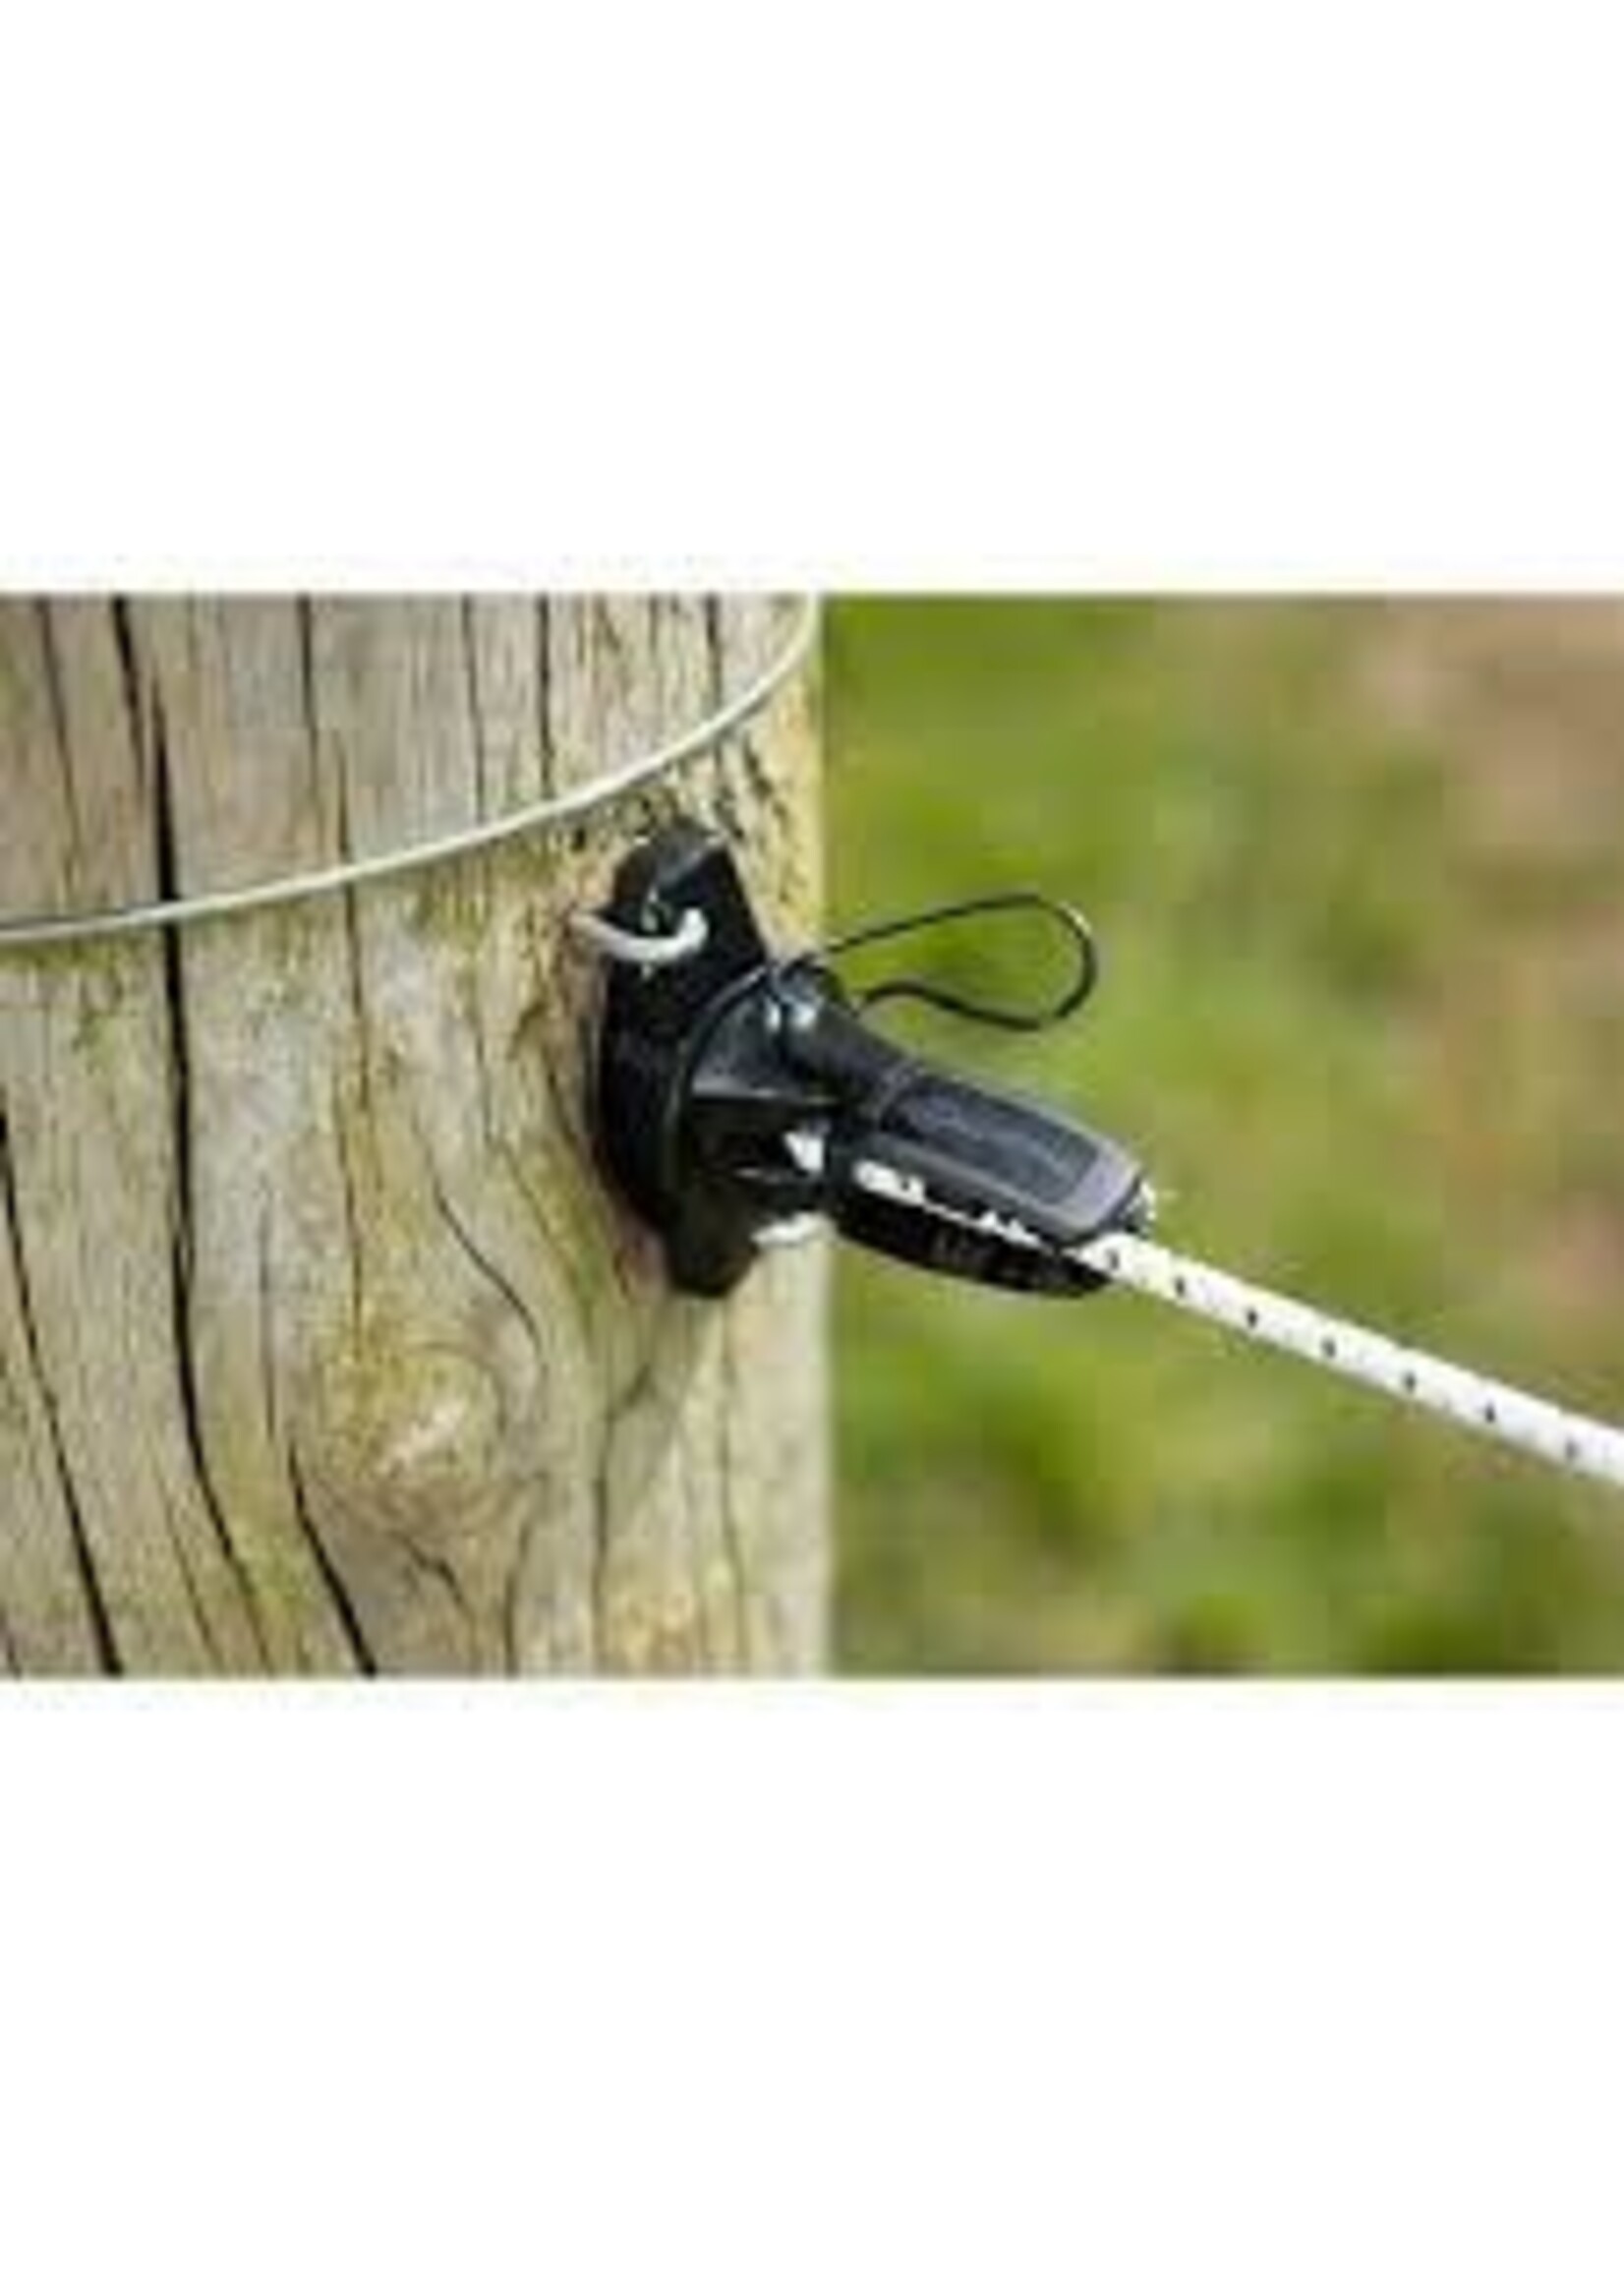 Gallagher Gate Kits - Bungy Cord Gripper